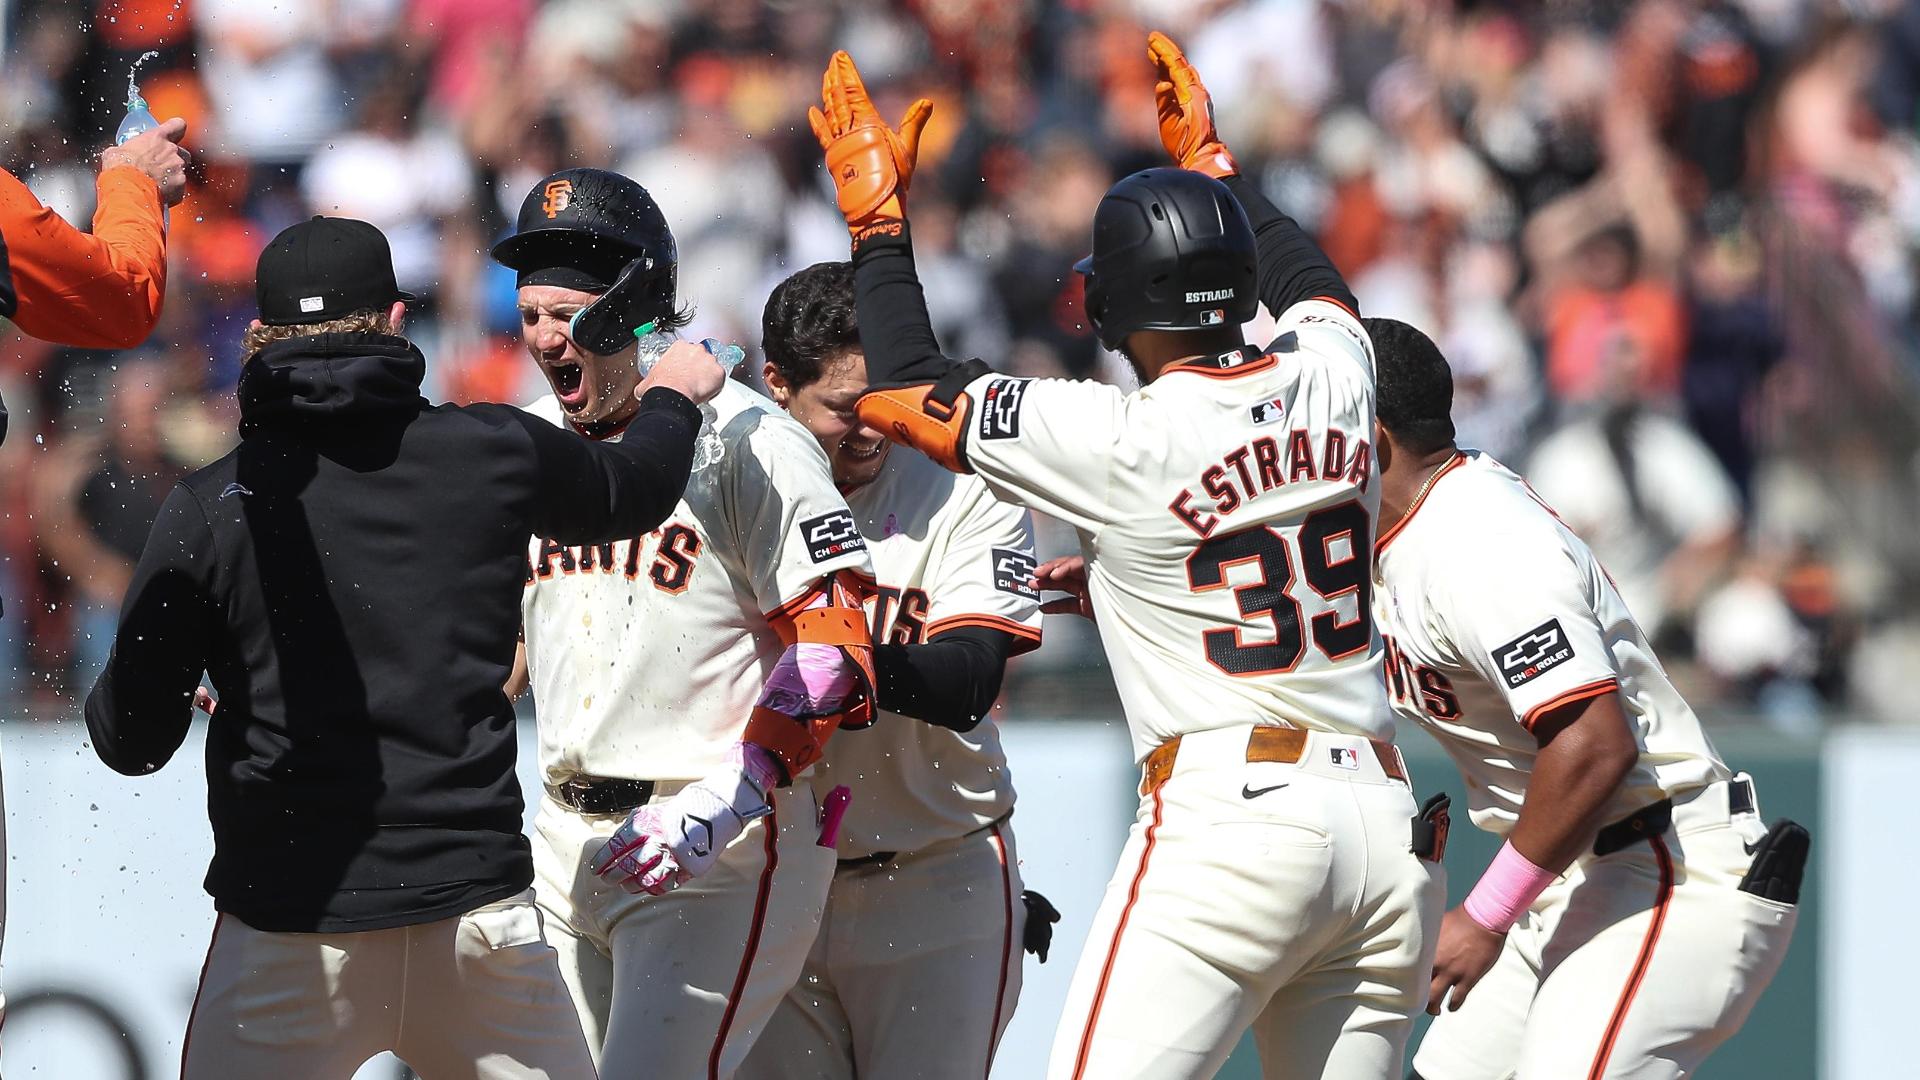 Casey Schmitt hits walk-off double in the 10th as Giants beat Reds 6-5  but lose Jung Hoo Lee